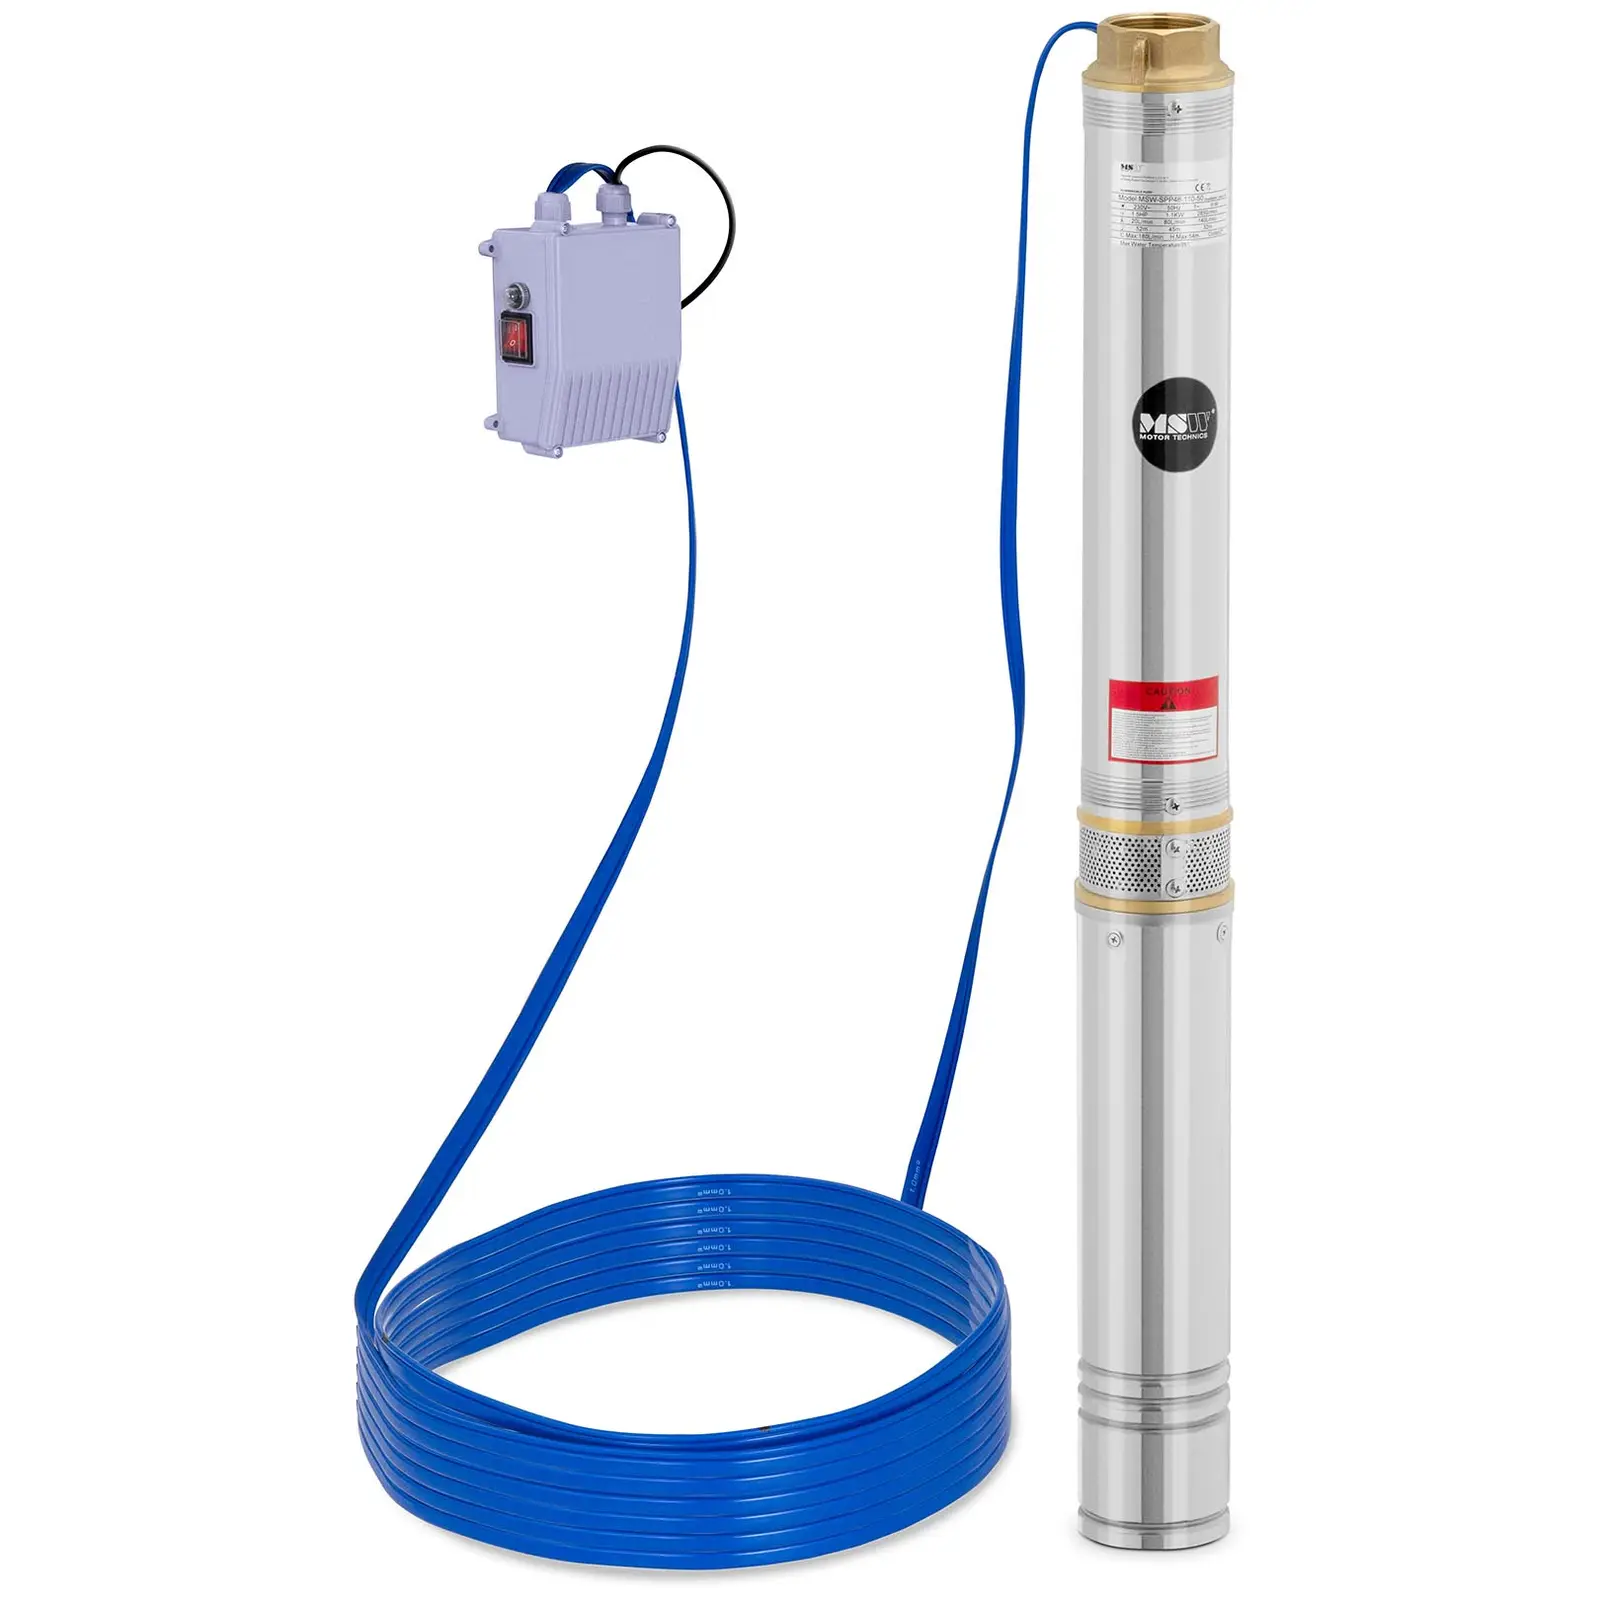 Submersible Pump - 10.8 l/h - 1500 W - stainless steel